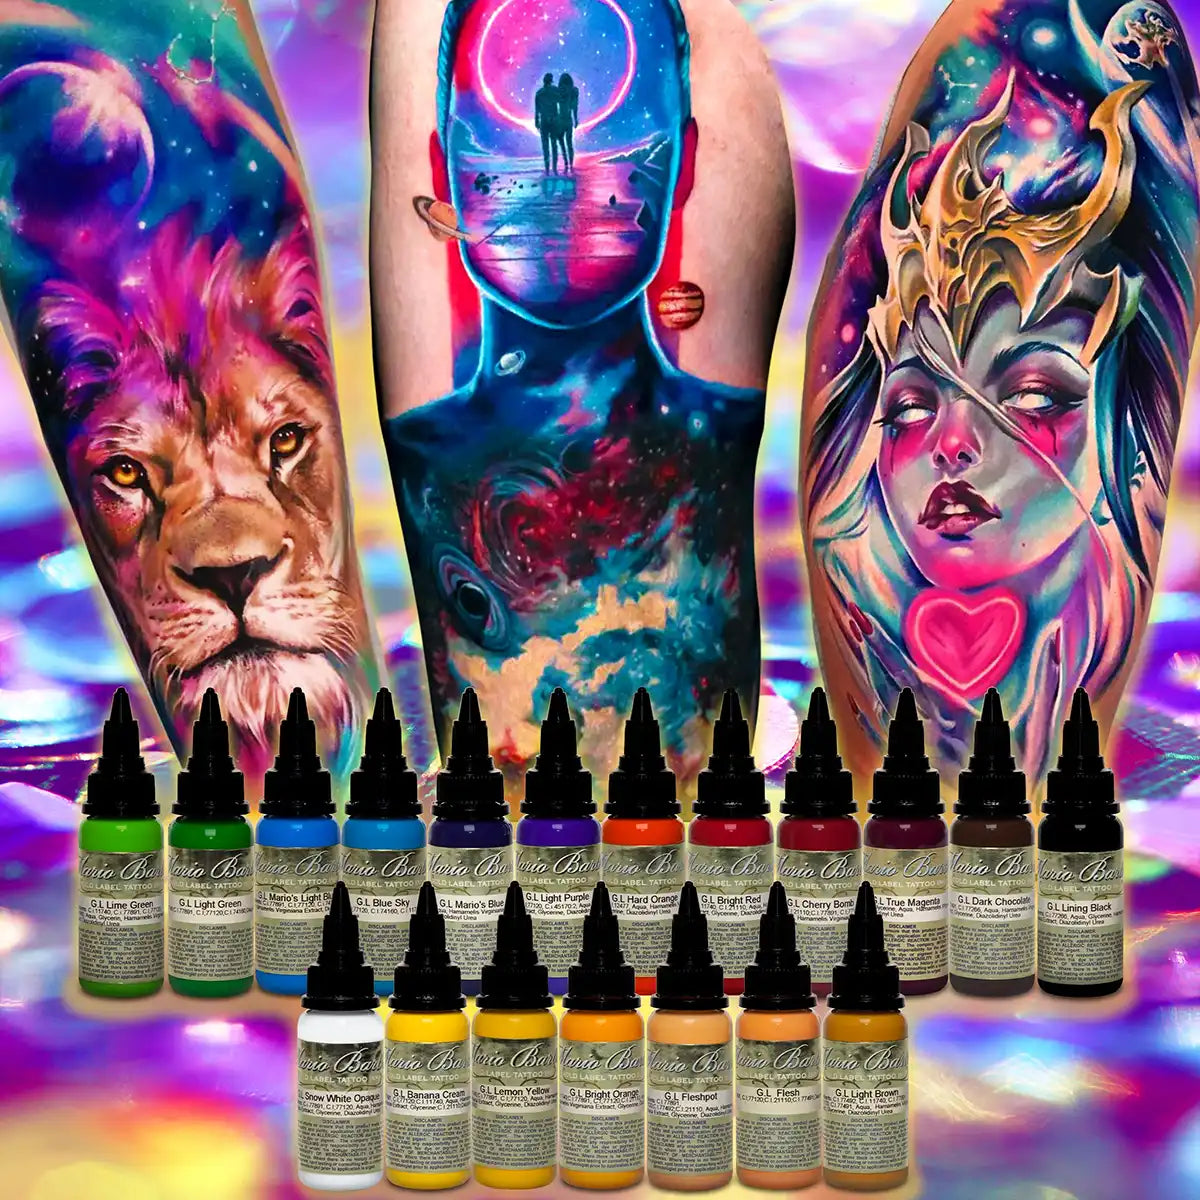 Intenze Tattoo Ink - Check out one of our INTENZE Authorized Dealers in  USA: United Tattoo Supply www.unitedtattoosupply.com Tel: (626) 513-8800  Email: info@unitedtattoosupply.com #tattoo #tattoos #dealer  #authorizeddealer #intenzetattooink